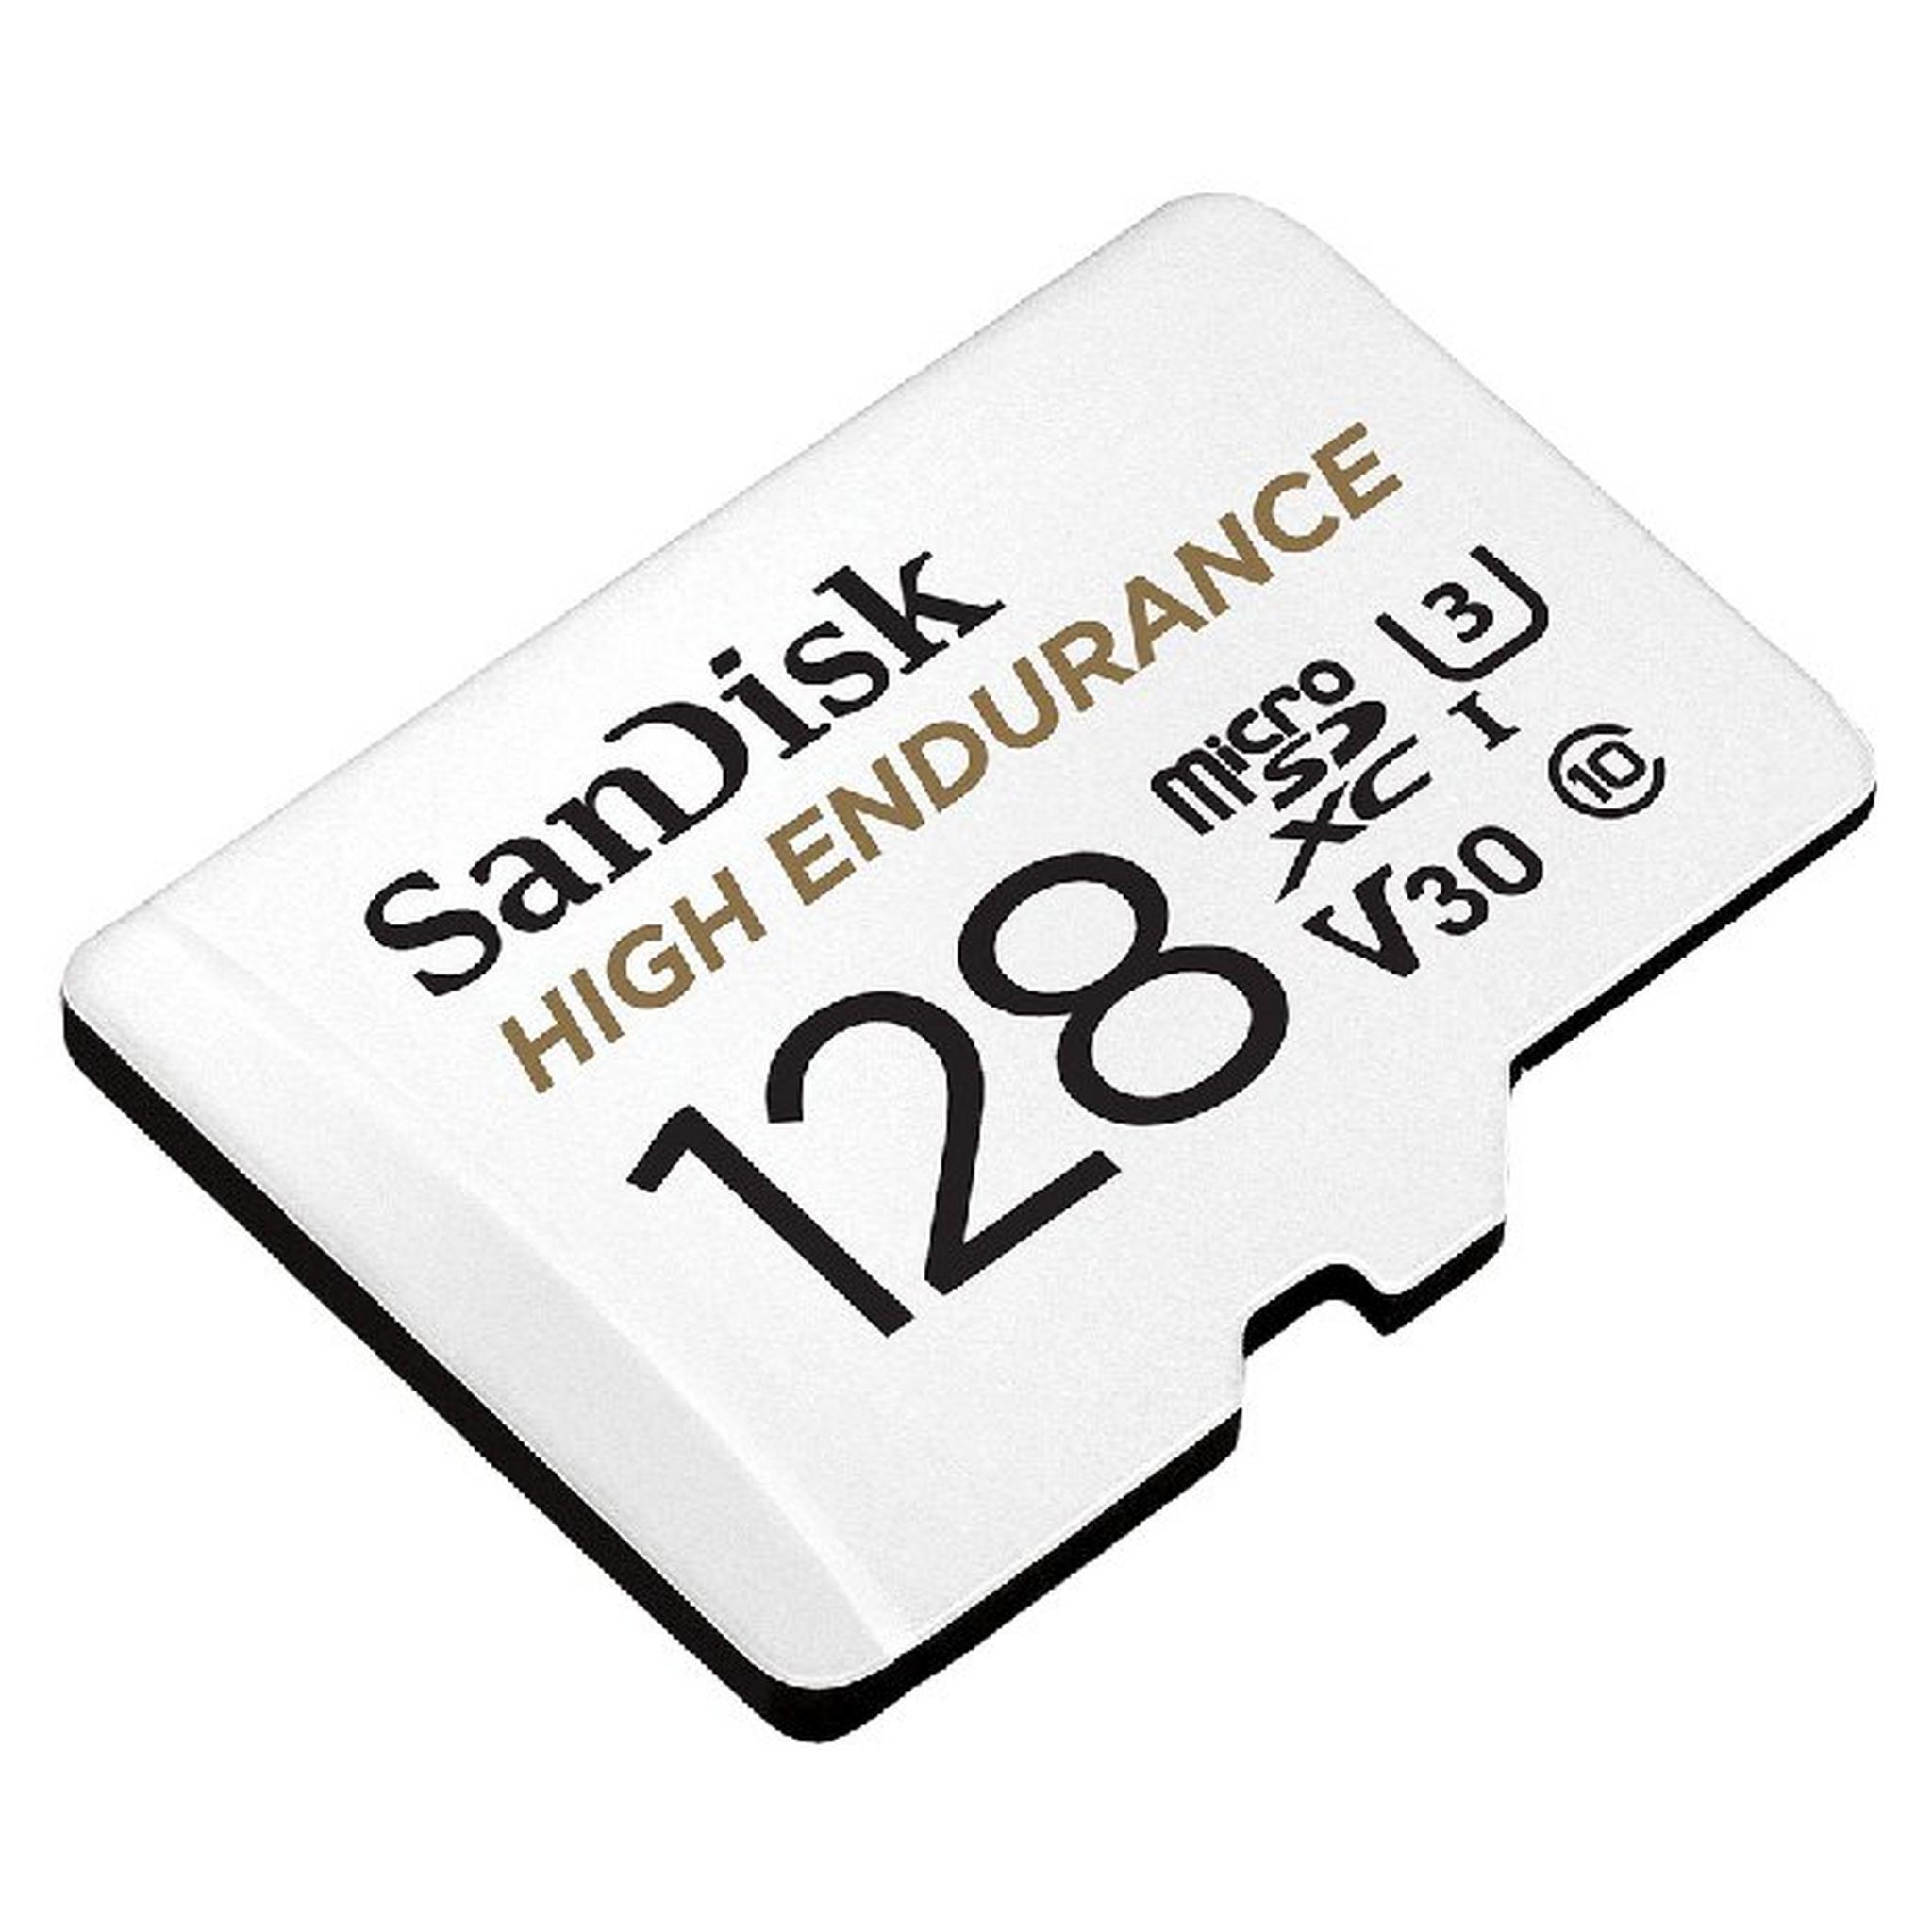 Sandisk Max Endurance Micro SDXC Card, 128GB, SD Adapter, SDSQQVR-128G-GN6IA - White